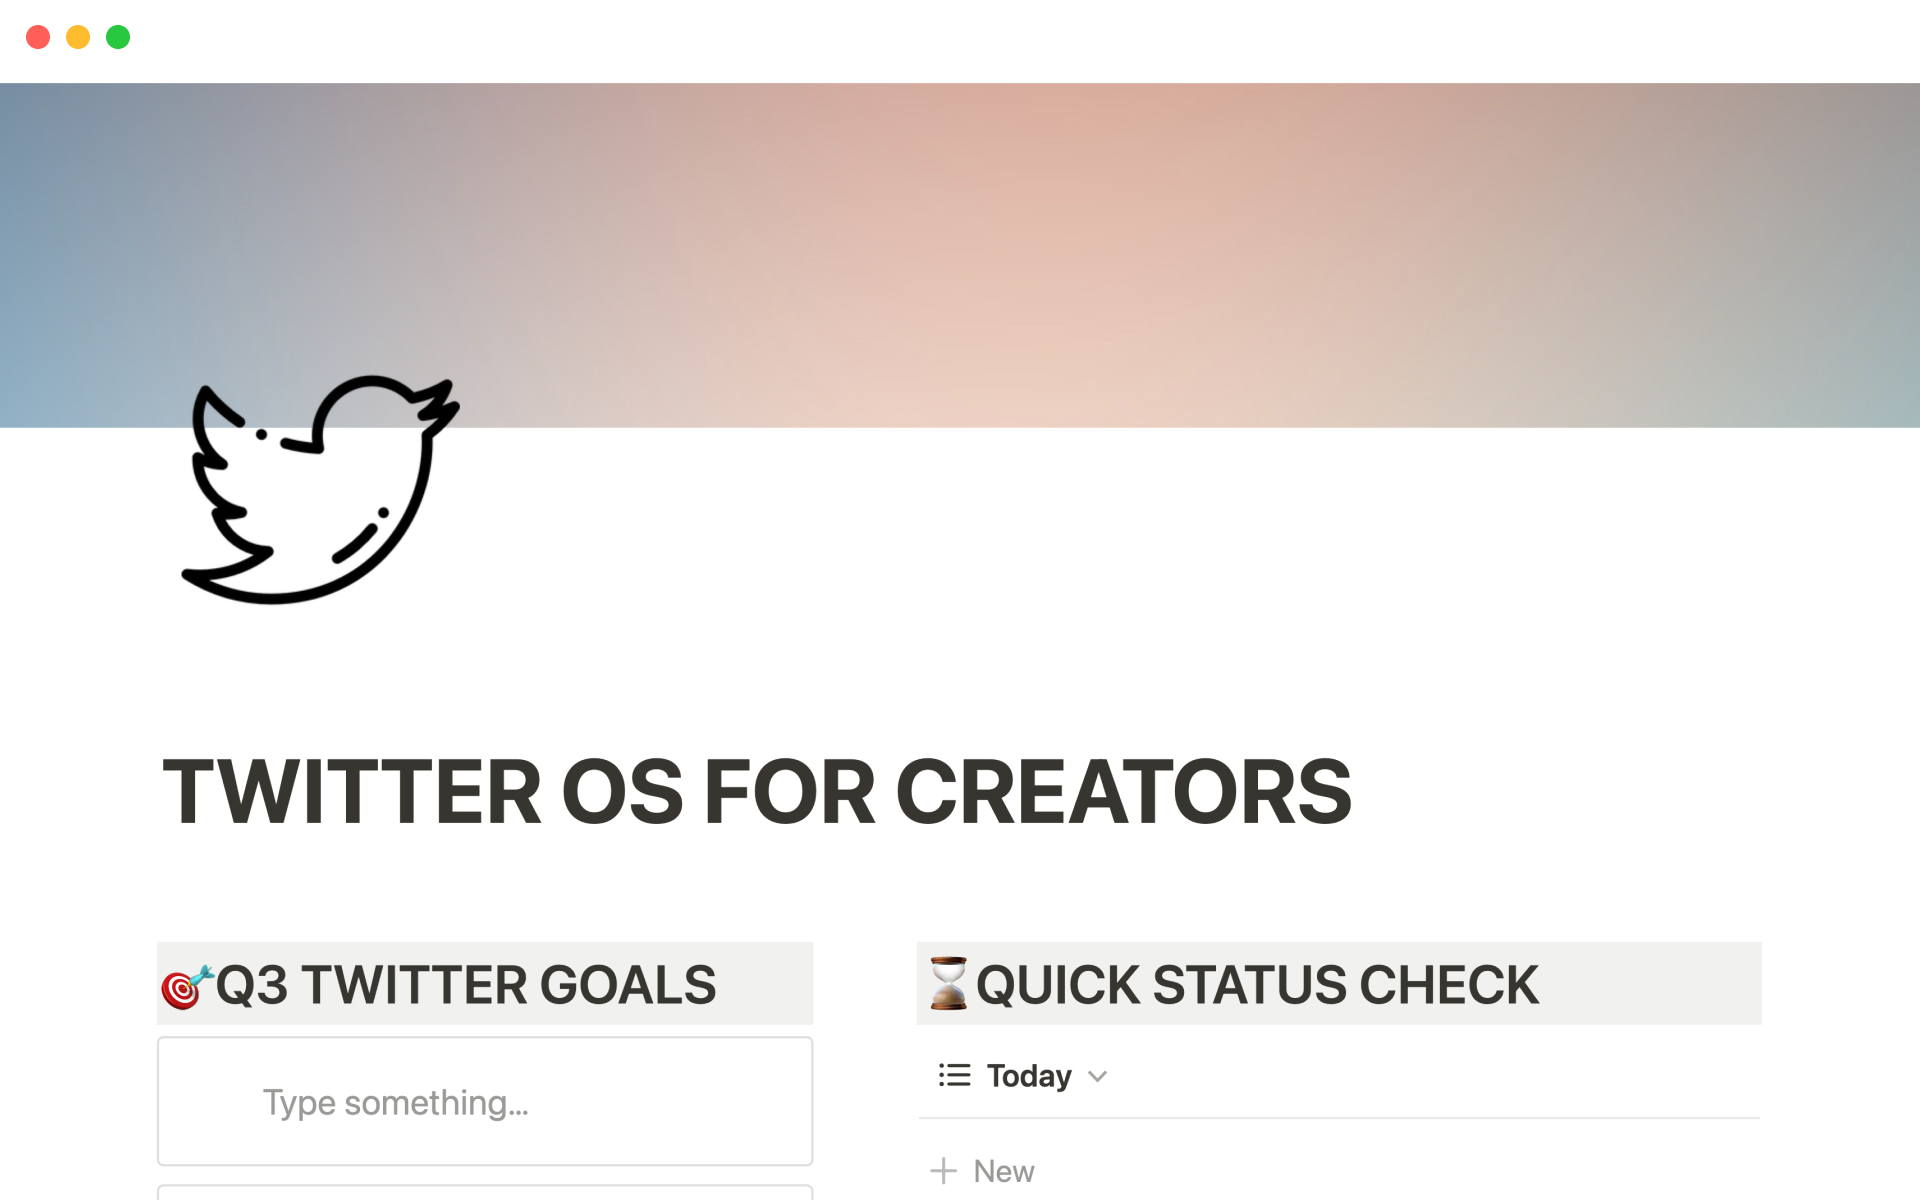 A template preview for Twitter OS for creators